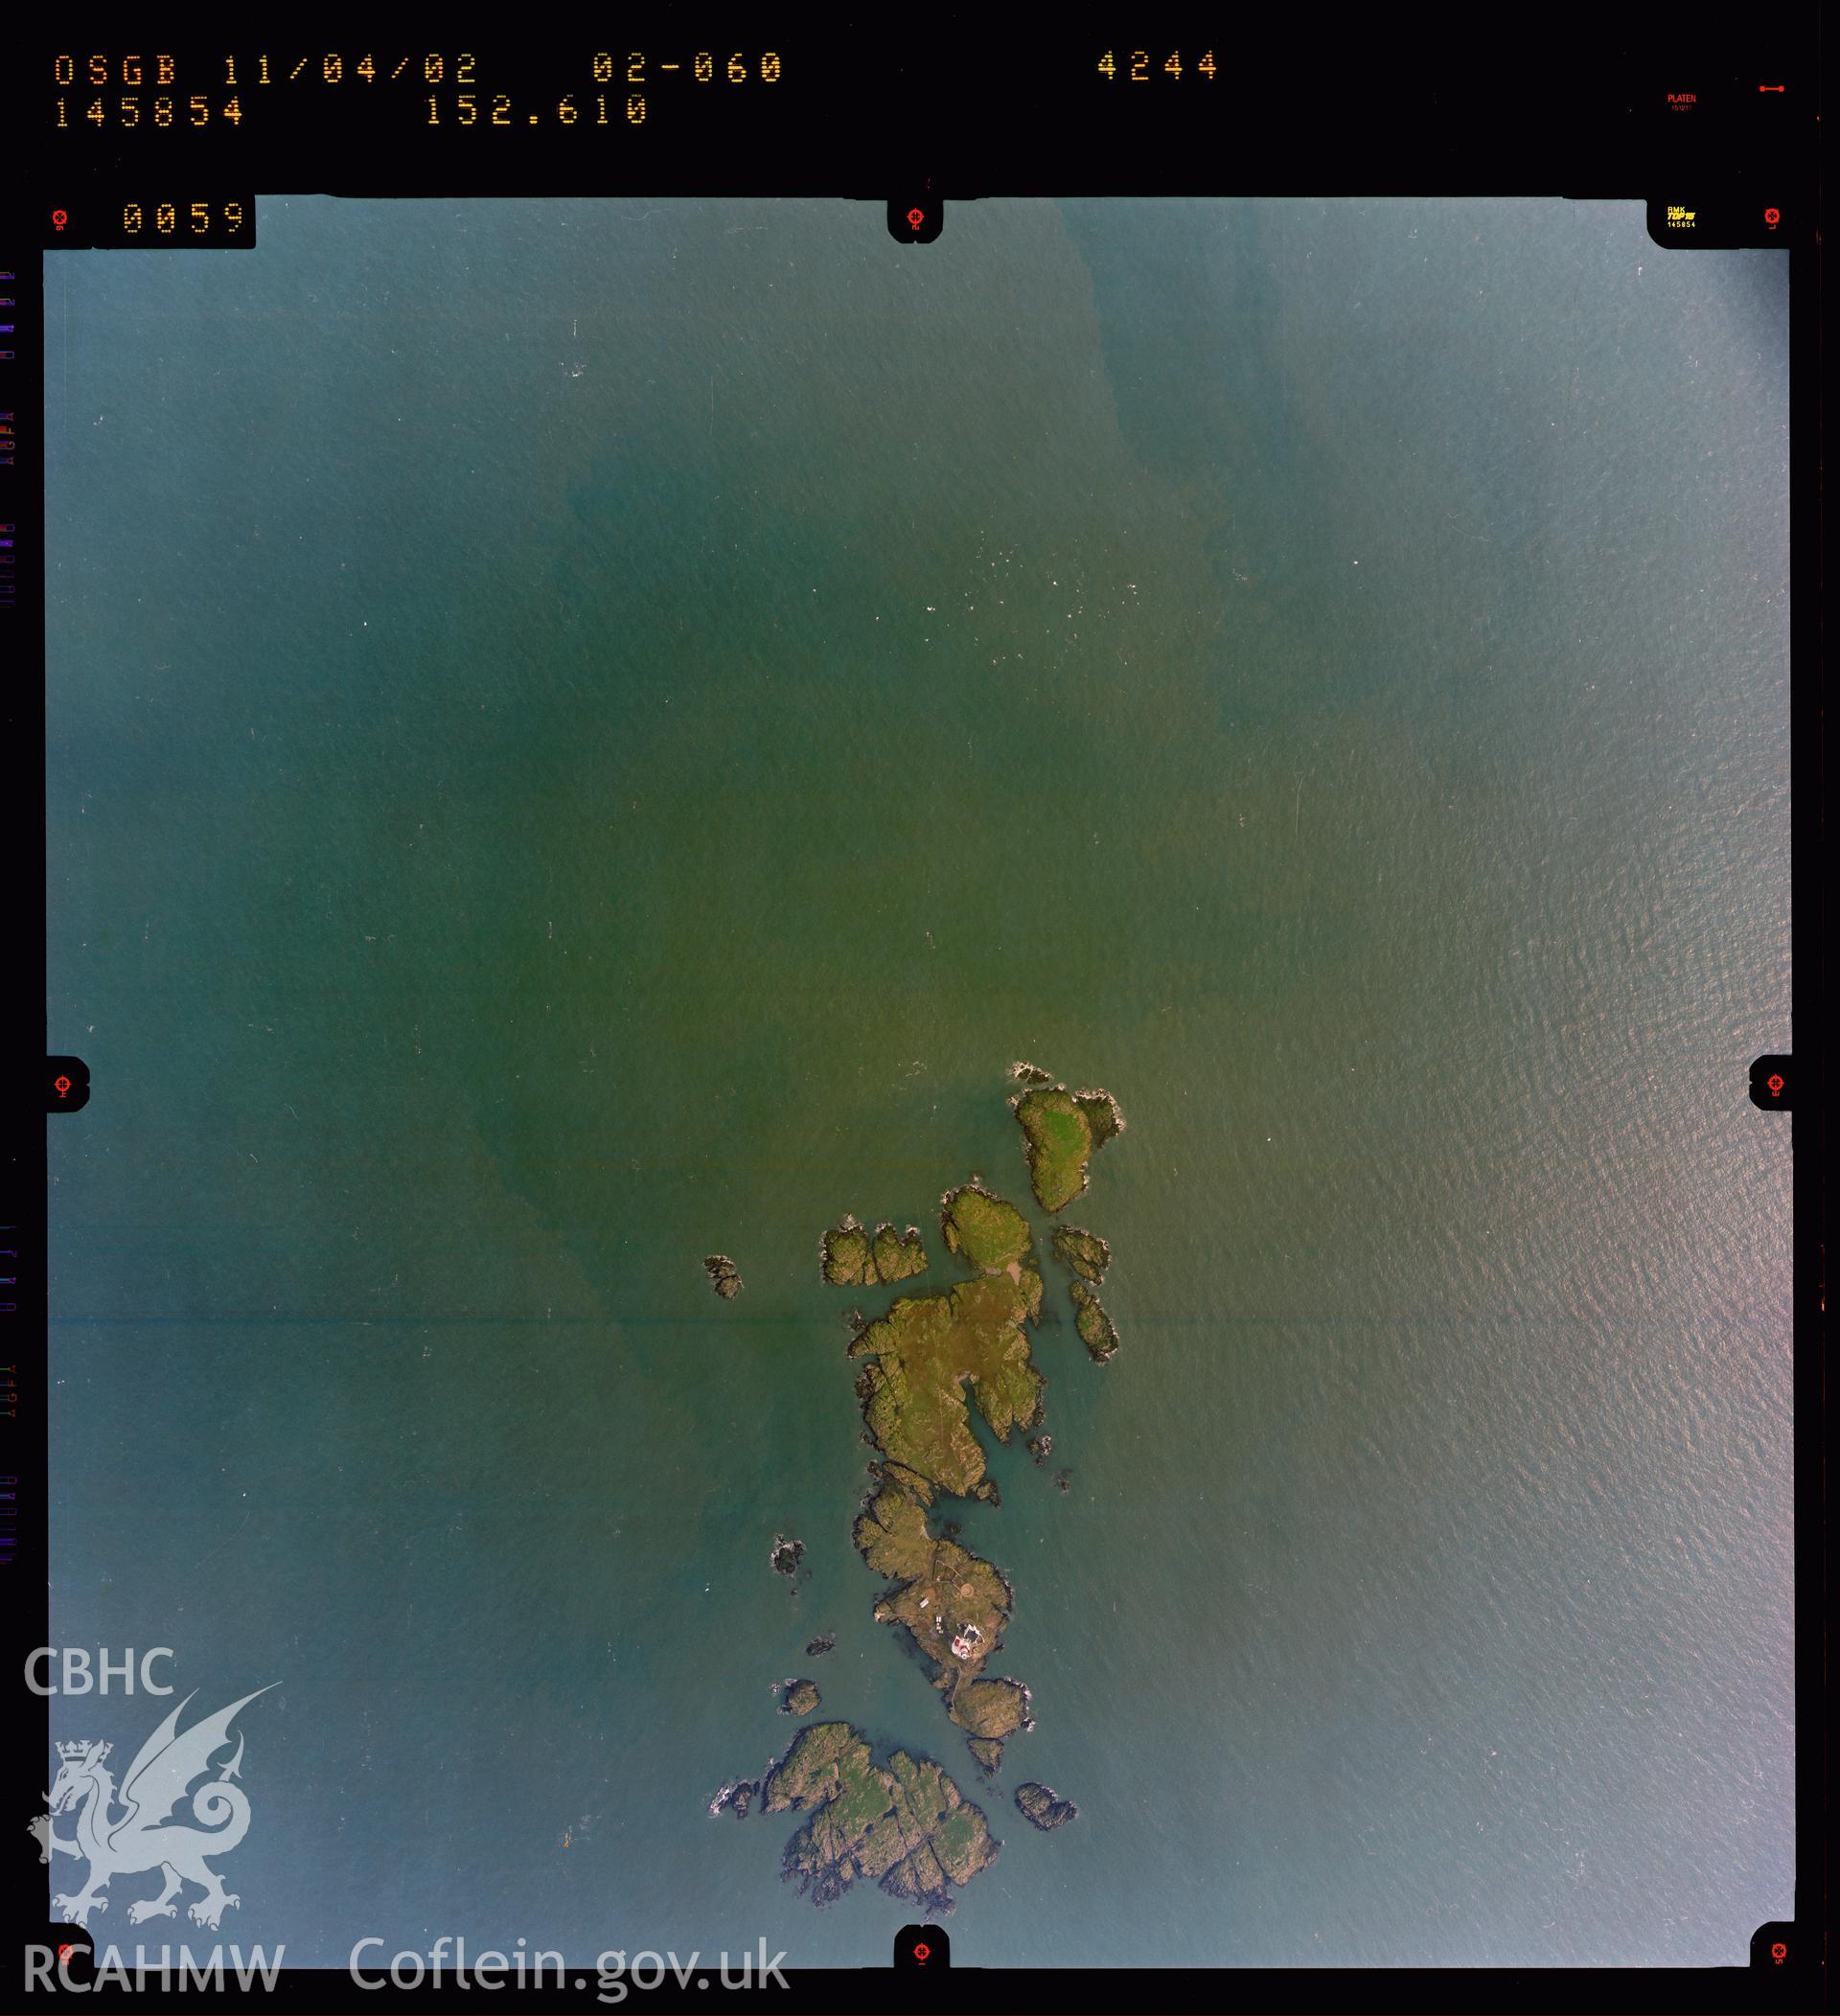 Digitized copy of a colour aerial photograph showing the Skerries, taken by Ordnance Survey, 2002.